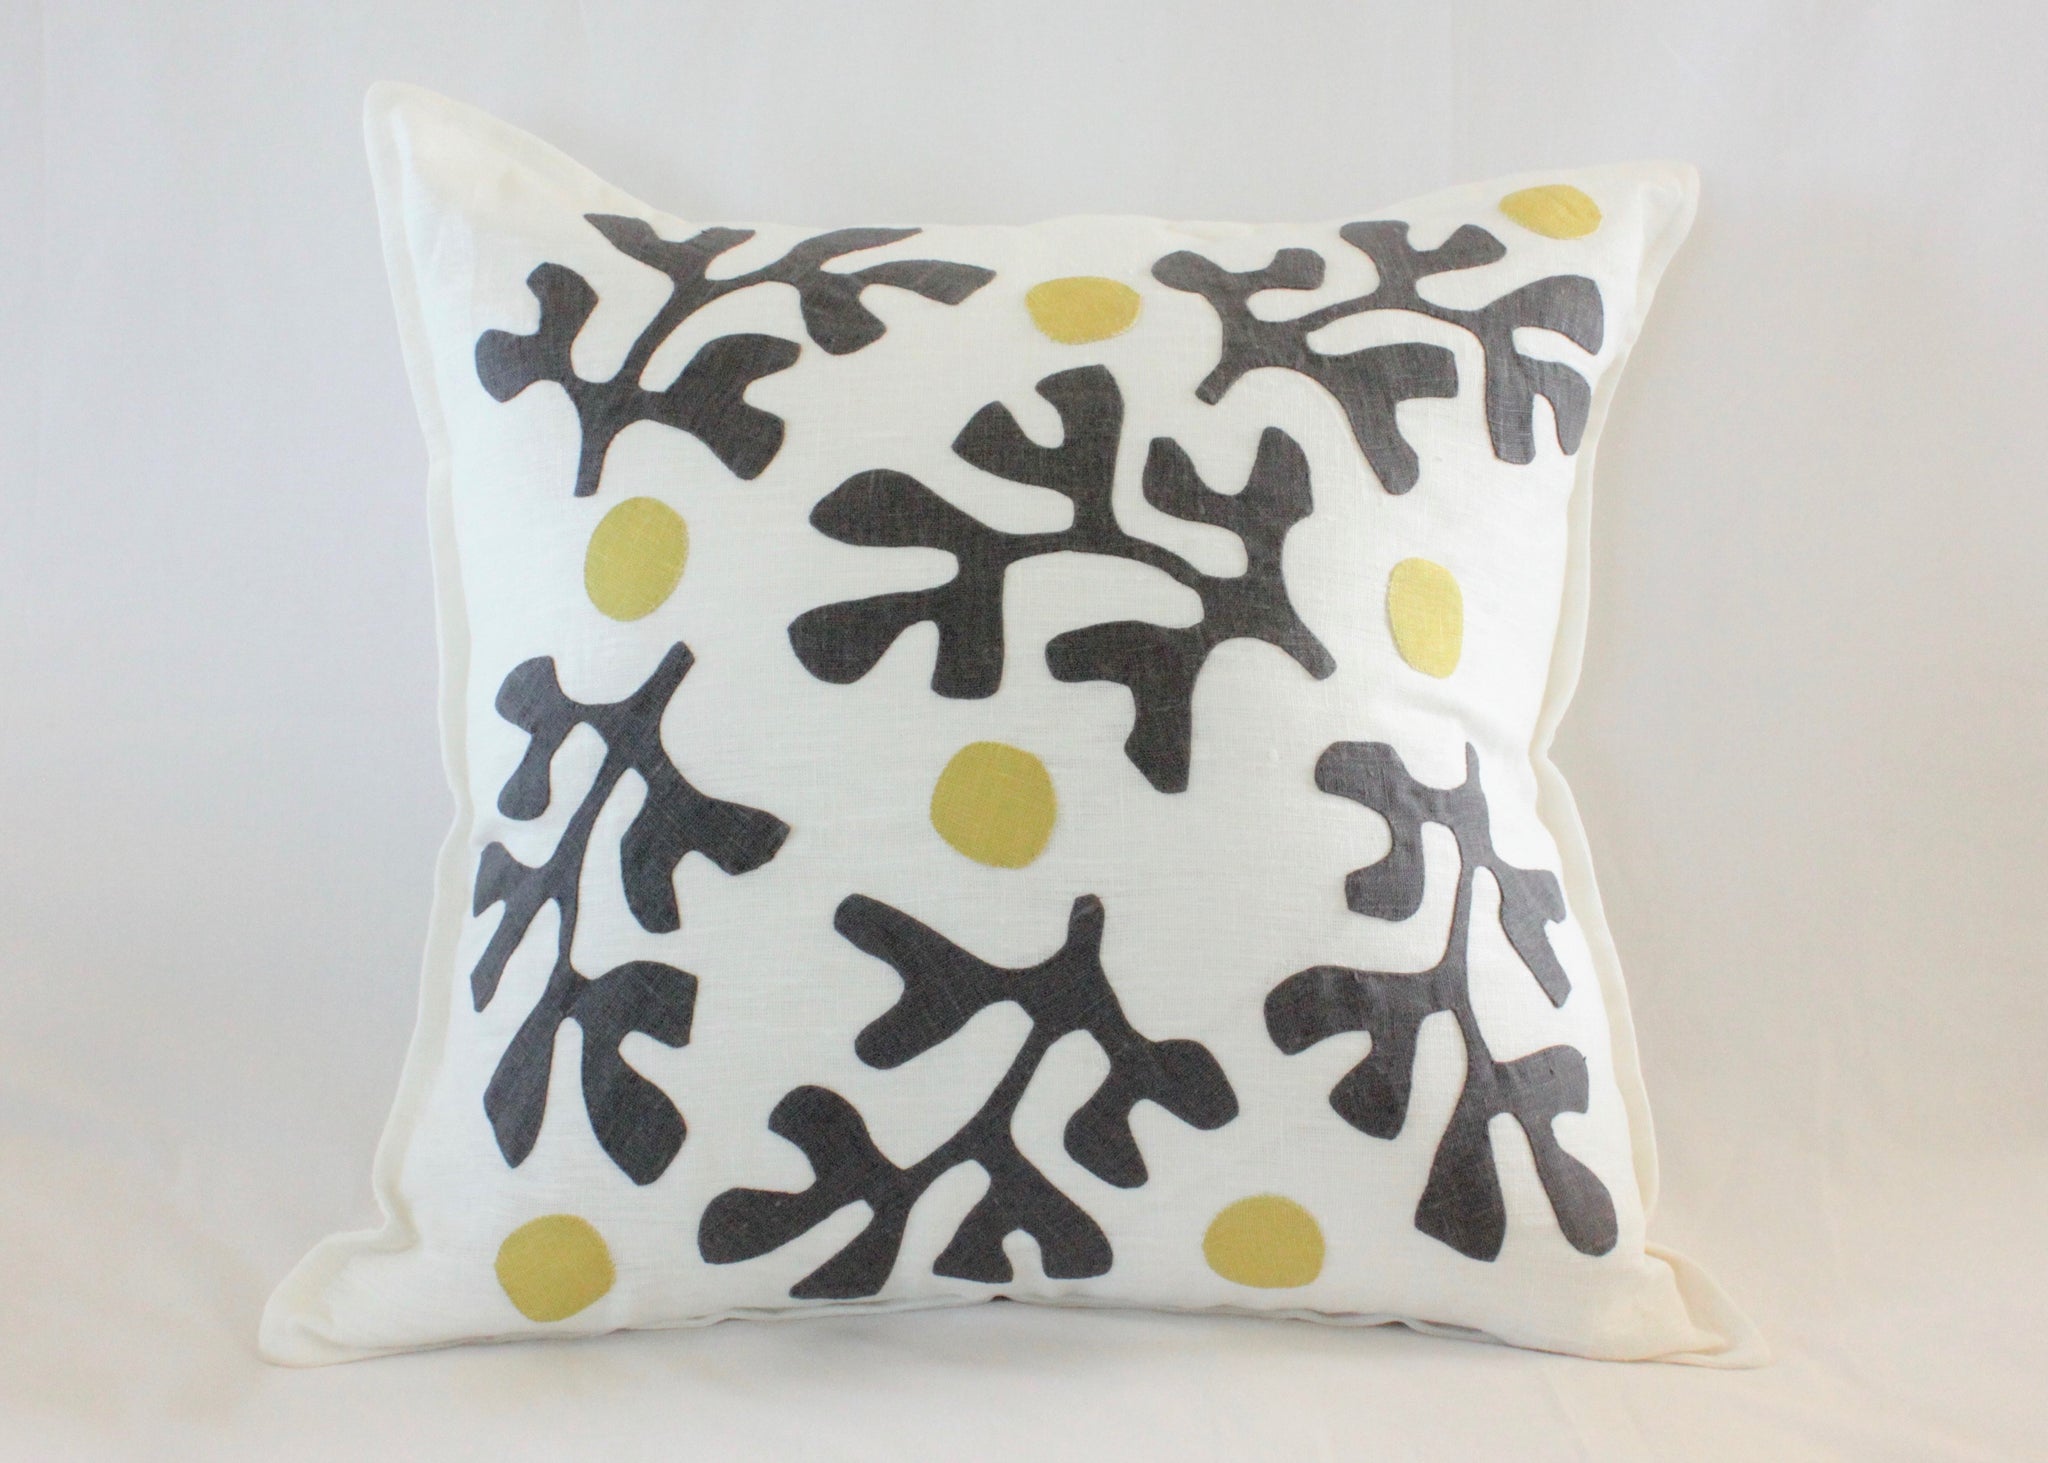 Cushion with hand embroidery 60 x 60 cm